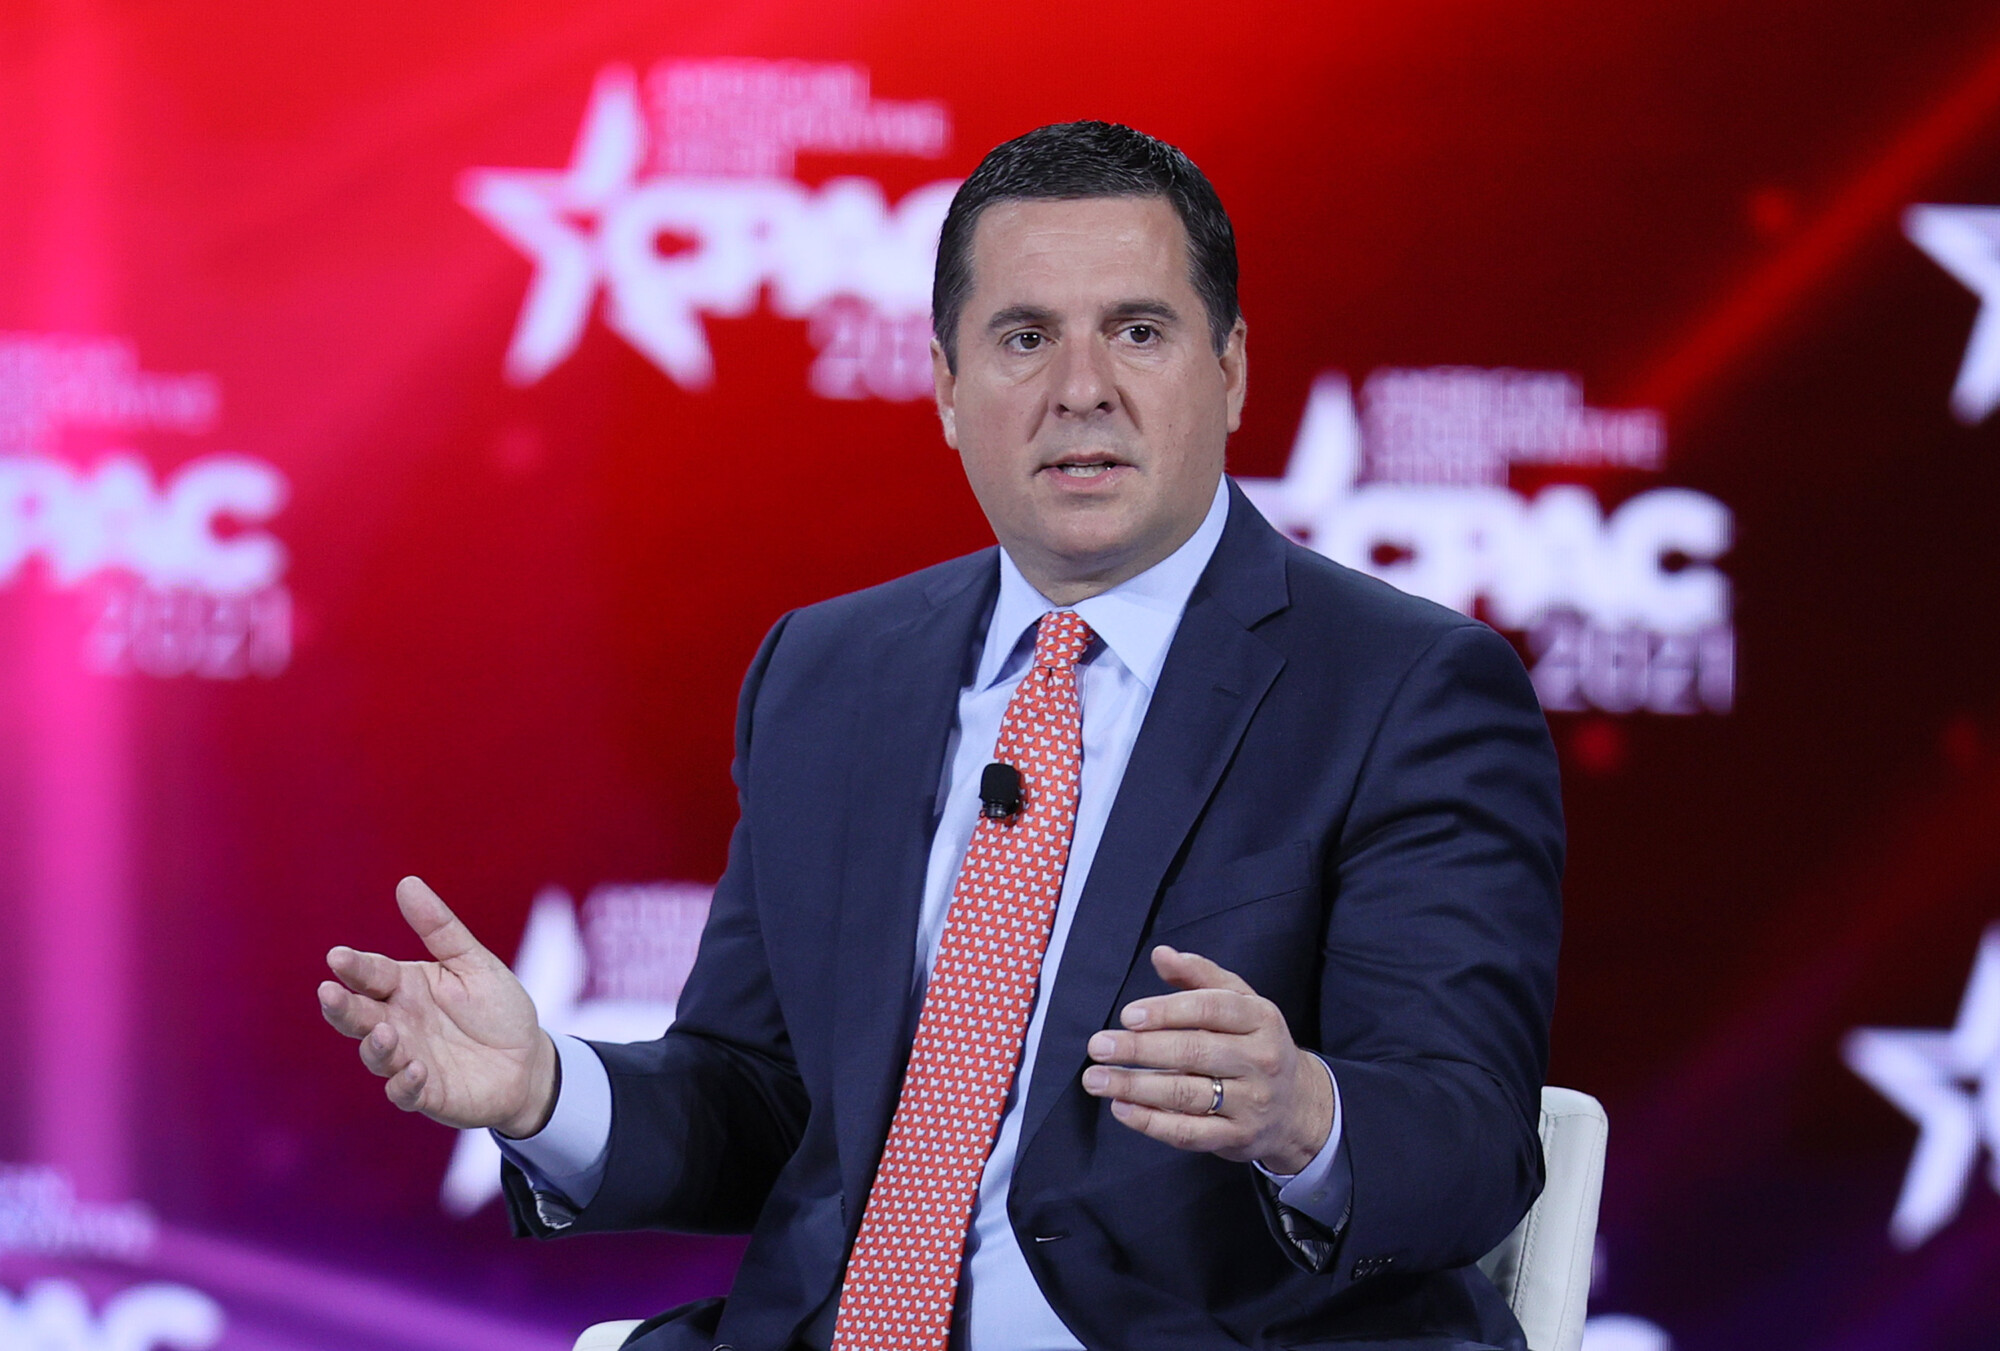 Rep. Devin Nunes Speaks About Socialism in California at CPAC